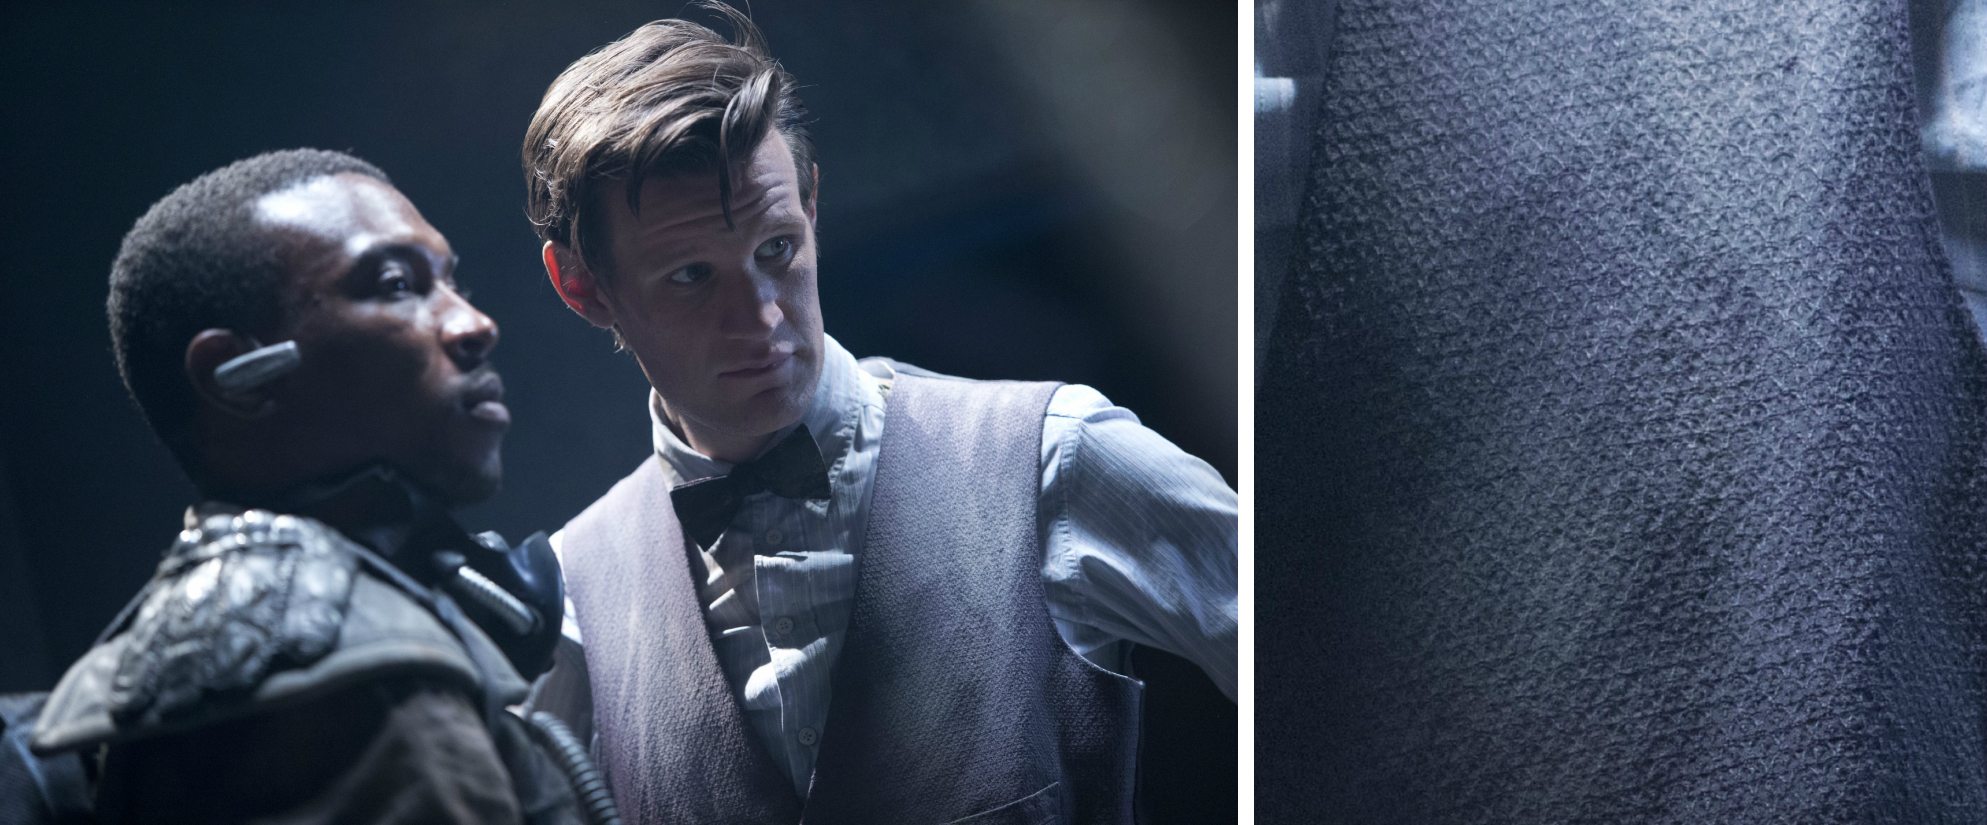 11th Doctor "scales" waistcoat fabric